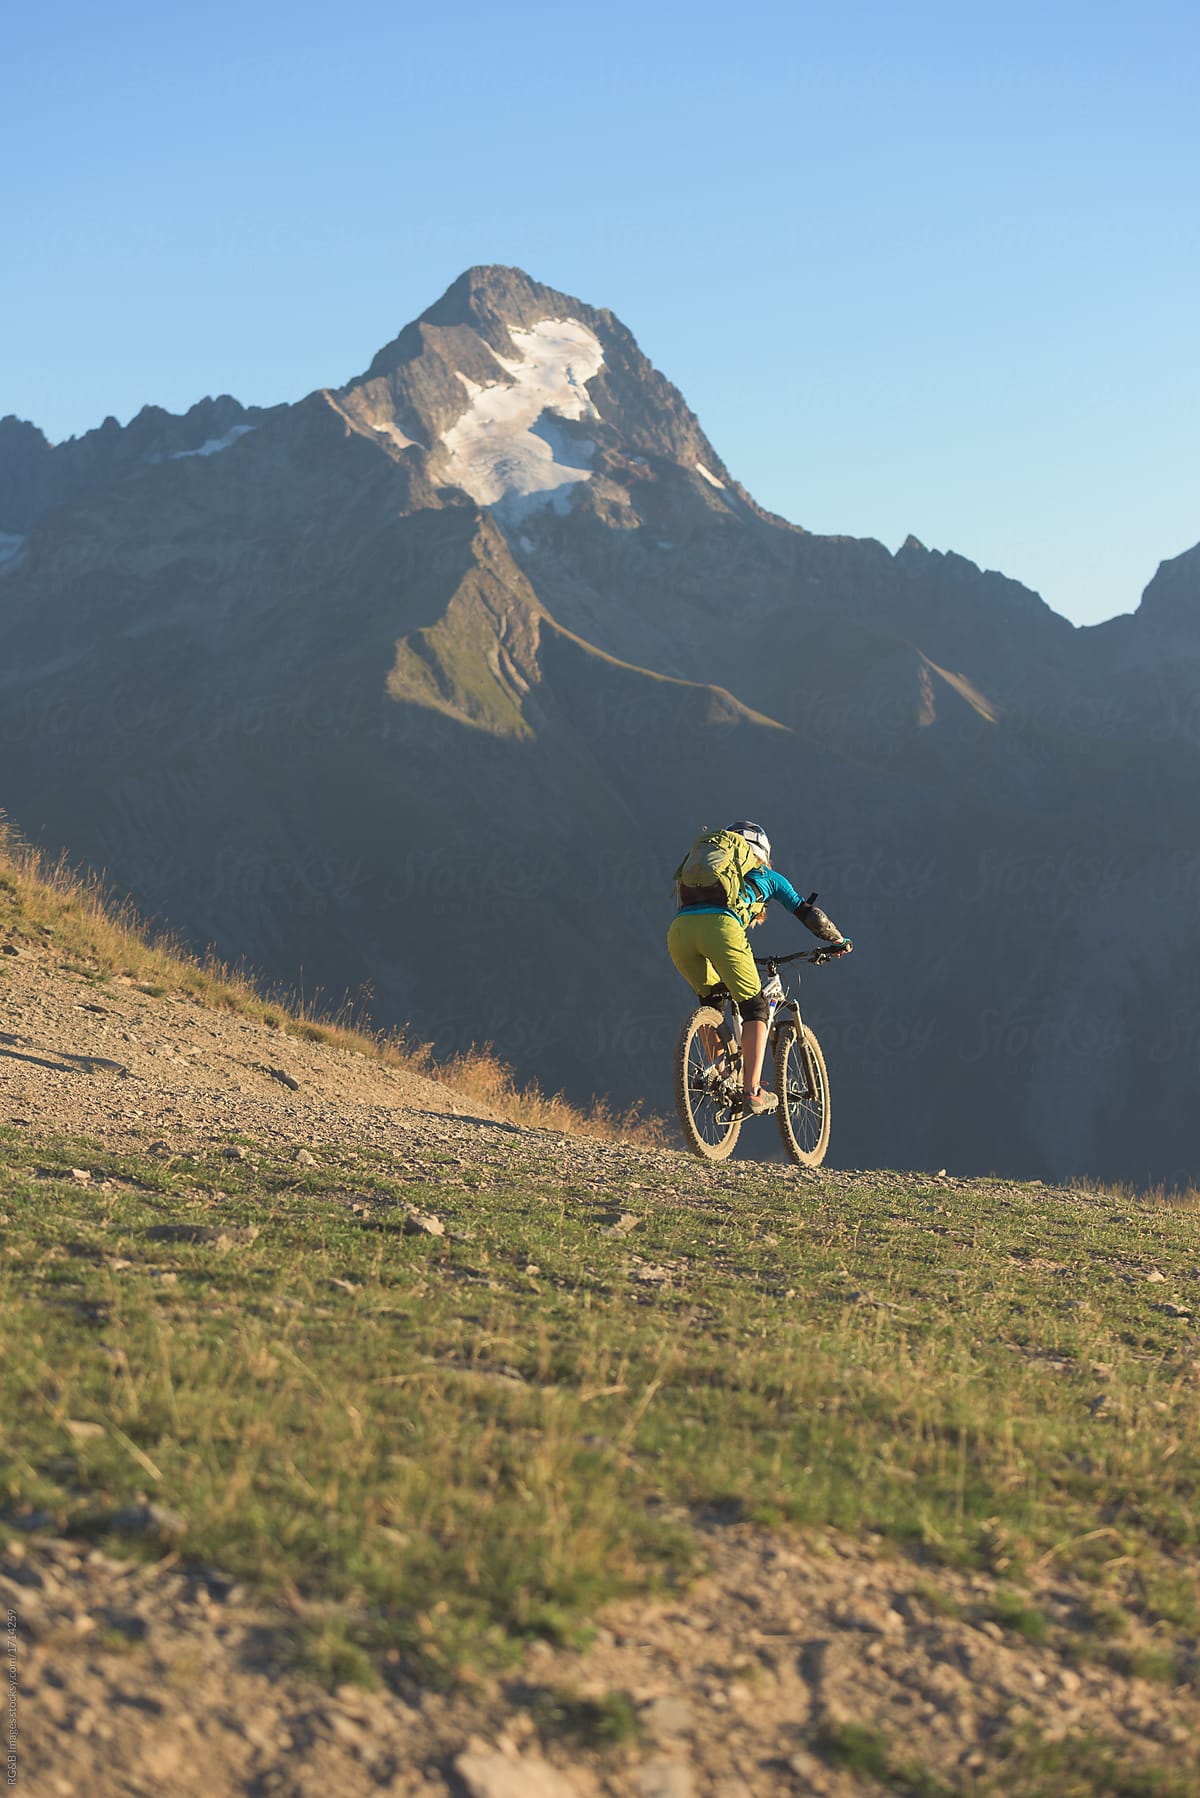 Mountain biker riding alone on backcountry route in the Alps